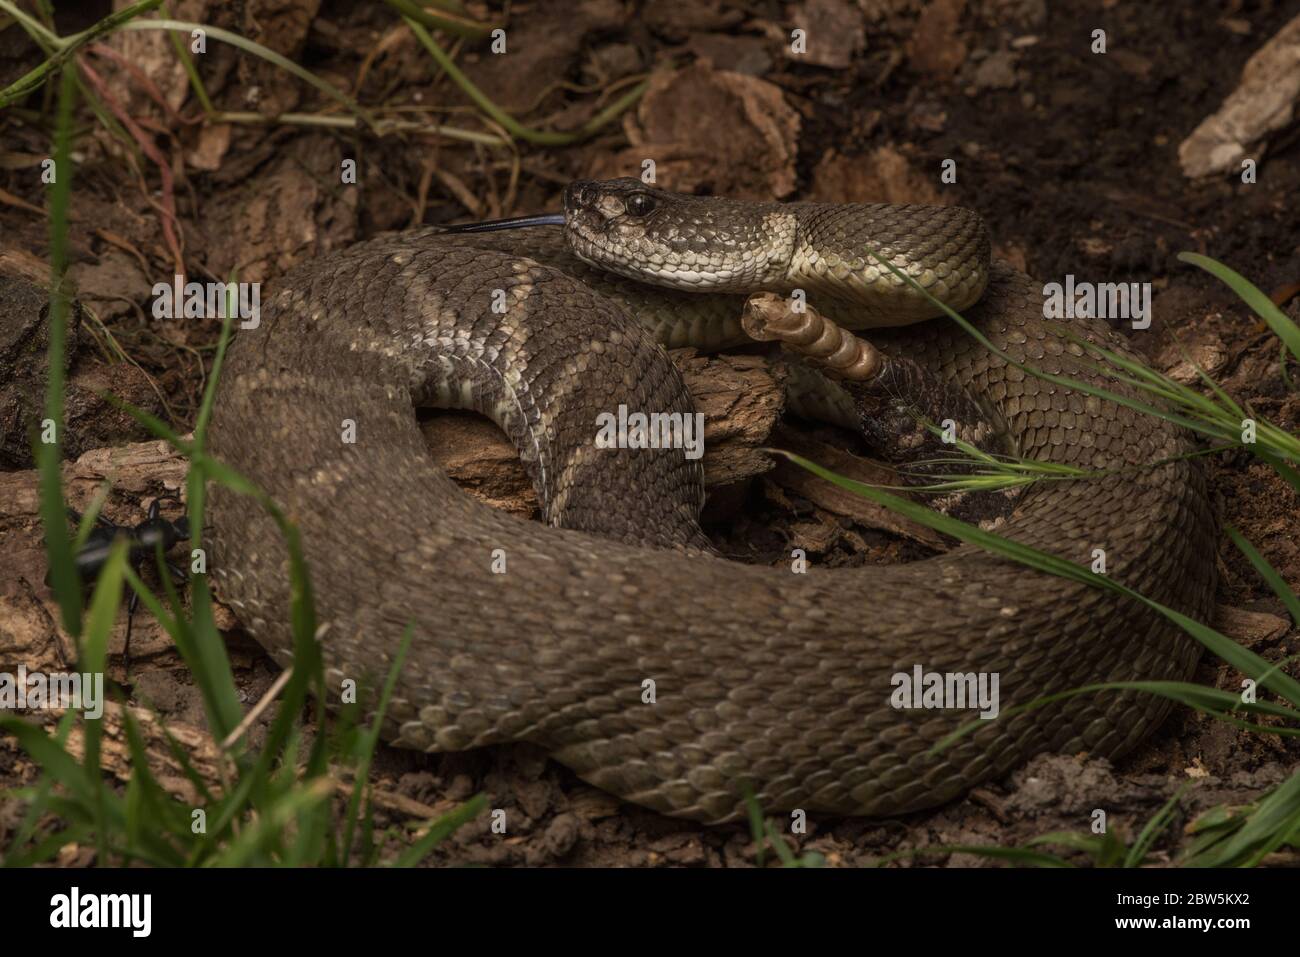 A northern pacific rattlesnake (Crotalus oreganus), the only dangerously venomous snake species in Northern California. Stock Photo